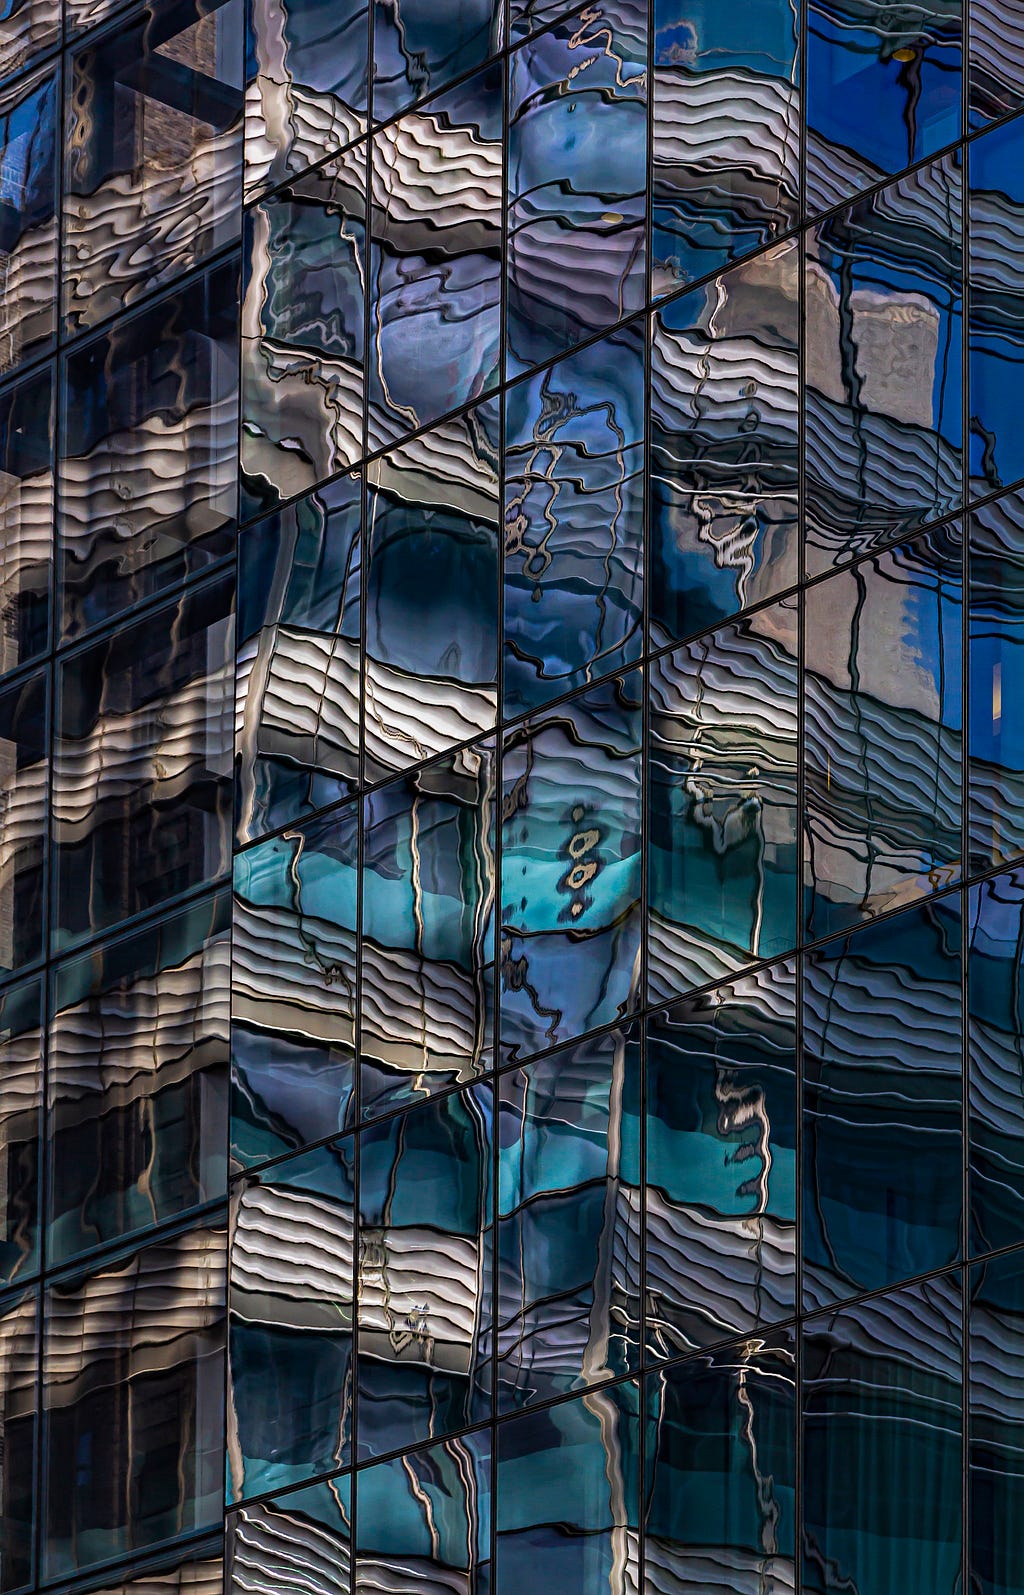 “Blue and white concrete building”, photograph by Robert Ullman (source: https://artist.scop.io/image/blue-and-white-concrete-building-73) — a building façade of square glass panes reflecting a distorted image of a concrete building in shades of dark blue, aqua, and off-white.